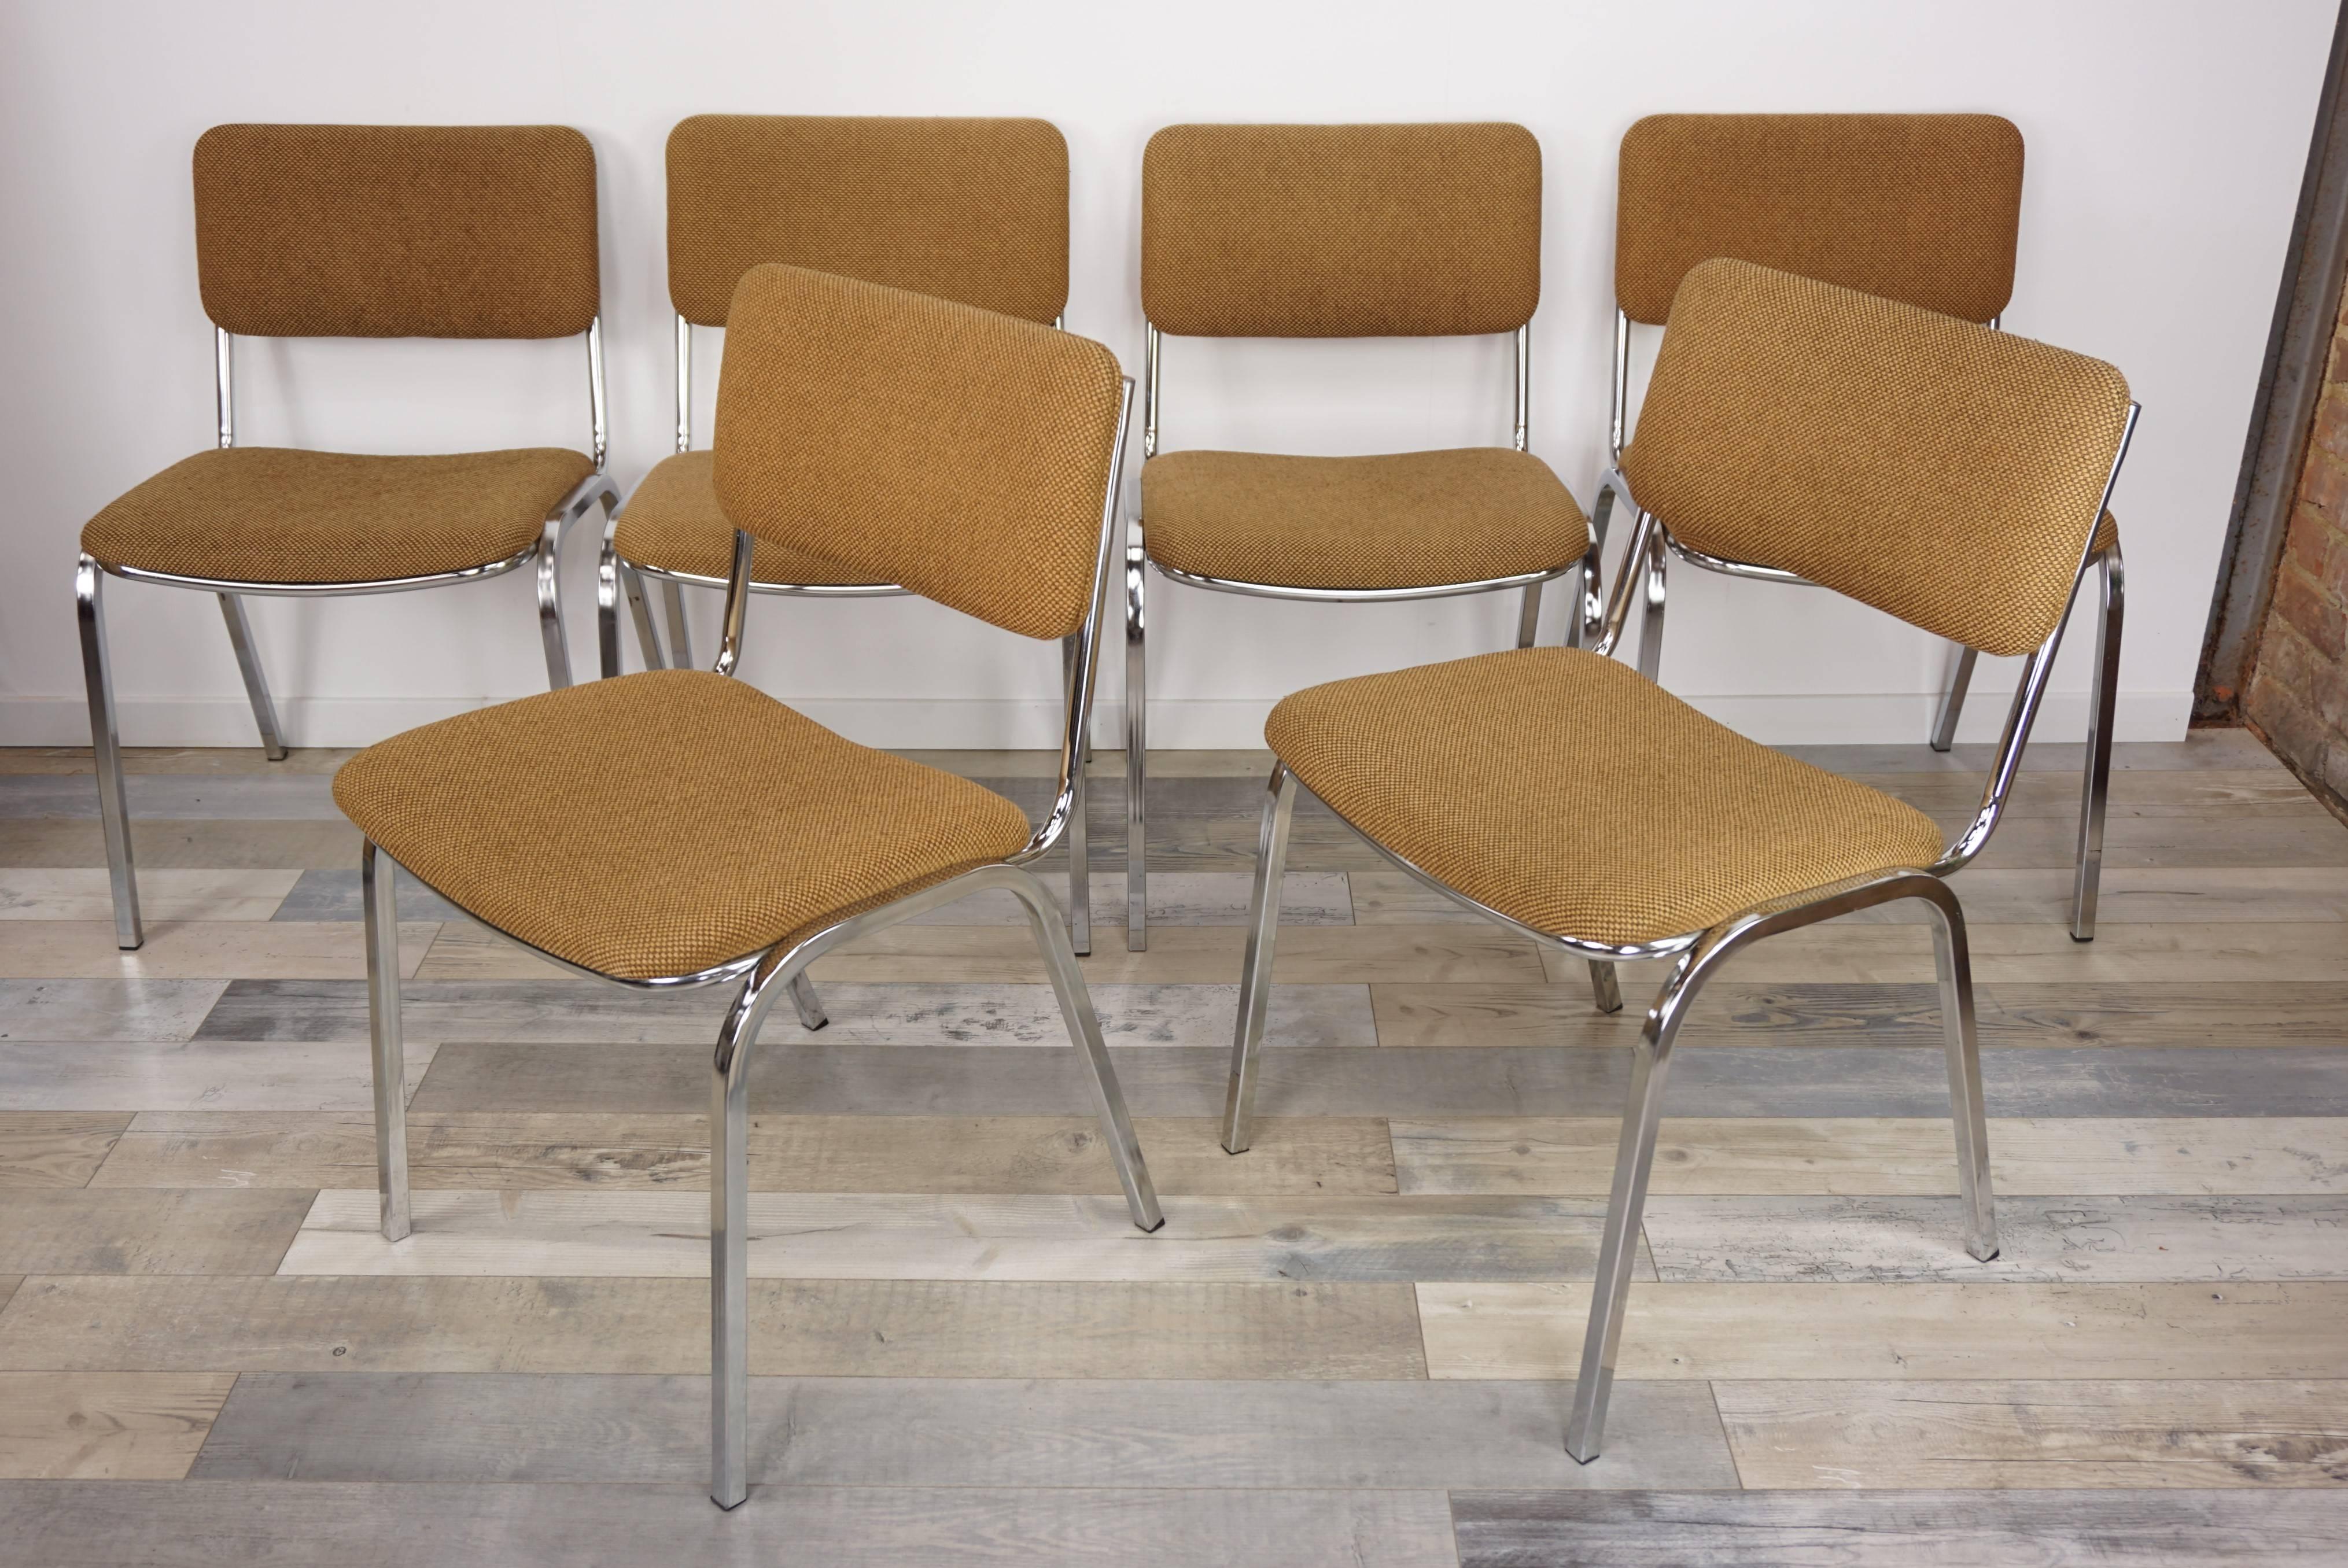 Industrial Chromed and Tweed Set of Six Chairs French Design from the 1960s